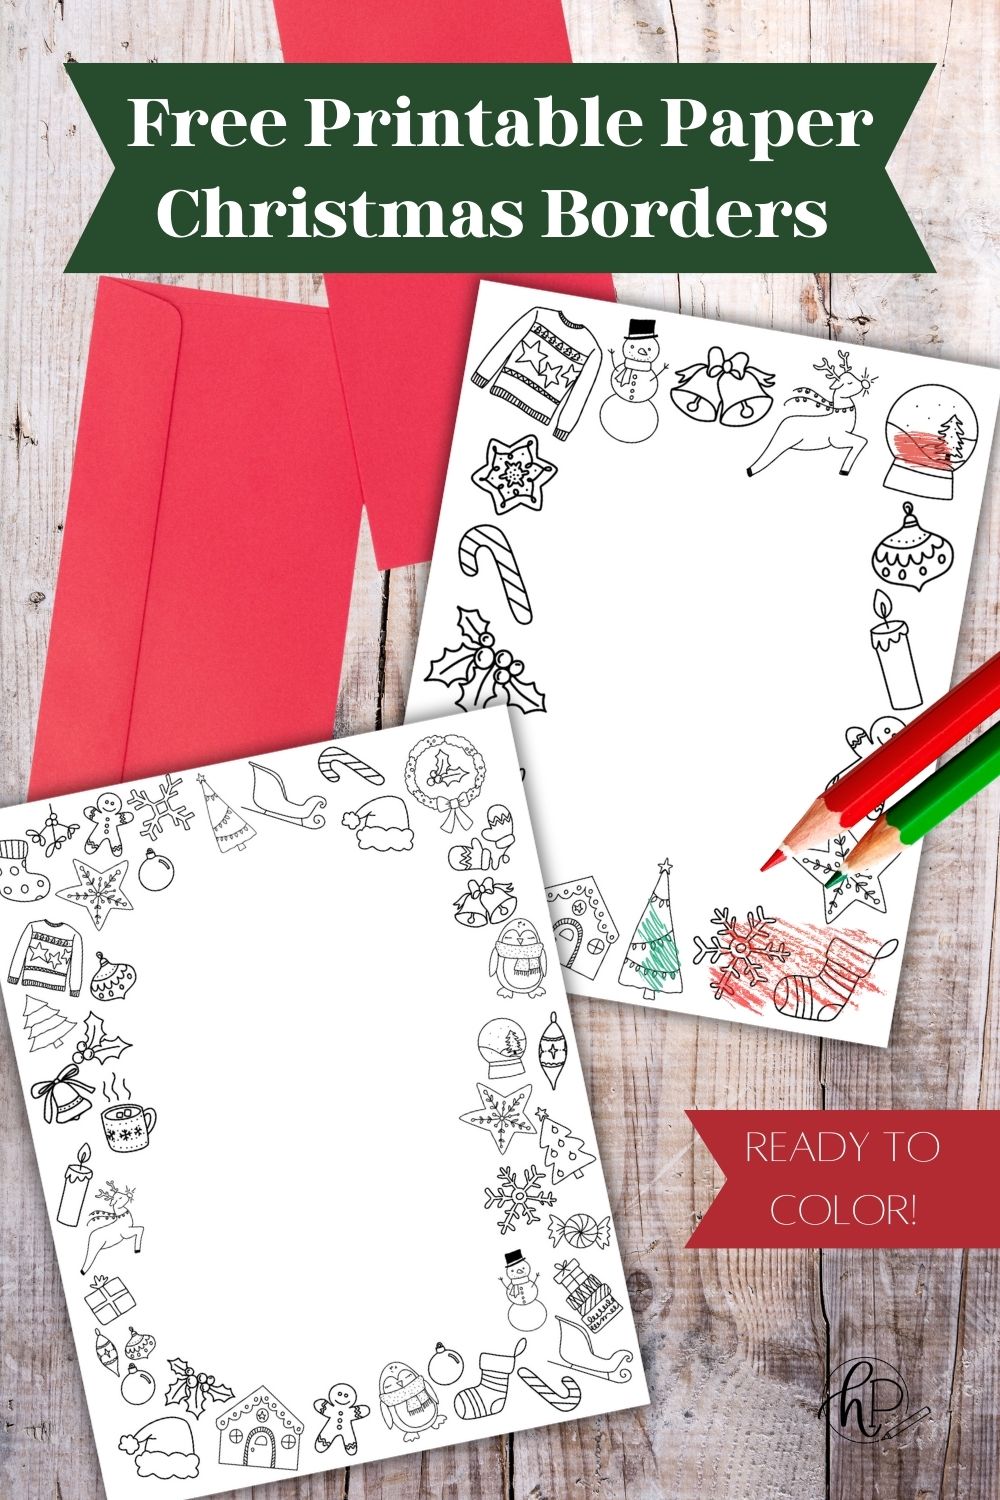 Christmas border paper printables for your holiday stationery perfect for coloring- image shows kids have been coloring with pencil crayons on papers